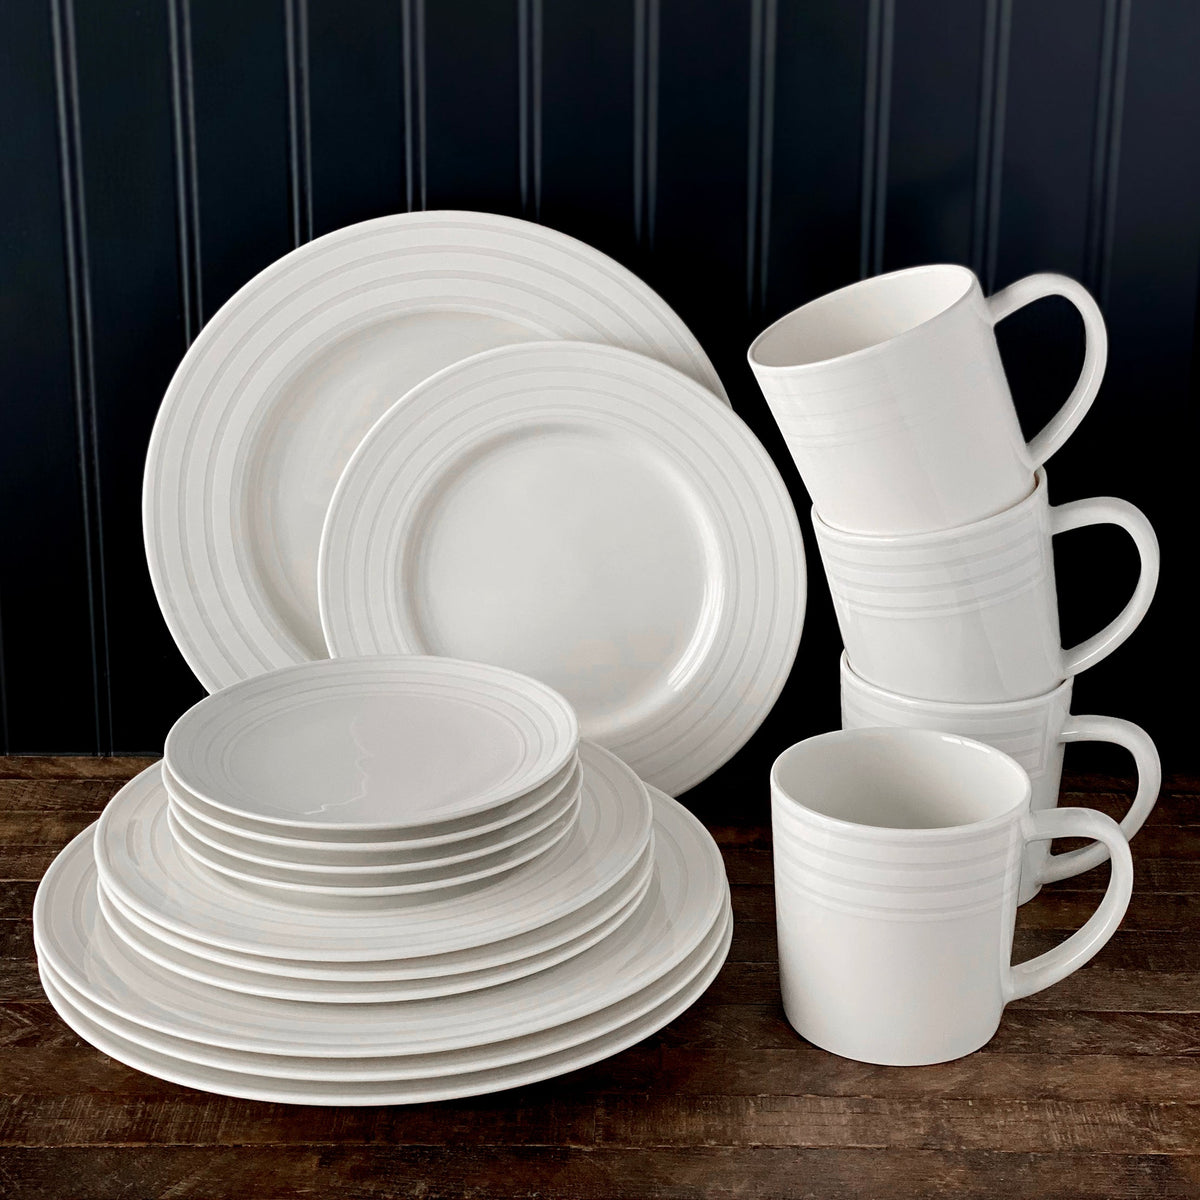 A neatly stacked set of white ceramic dinnerware, including plates, bowls, and mugs made of high-fired porcelain, sits elegantly on a wooden table with a dark Cambridge Stripe Rimmed Salad Plate by Caskata Artisanal Home background.